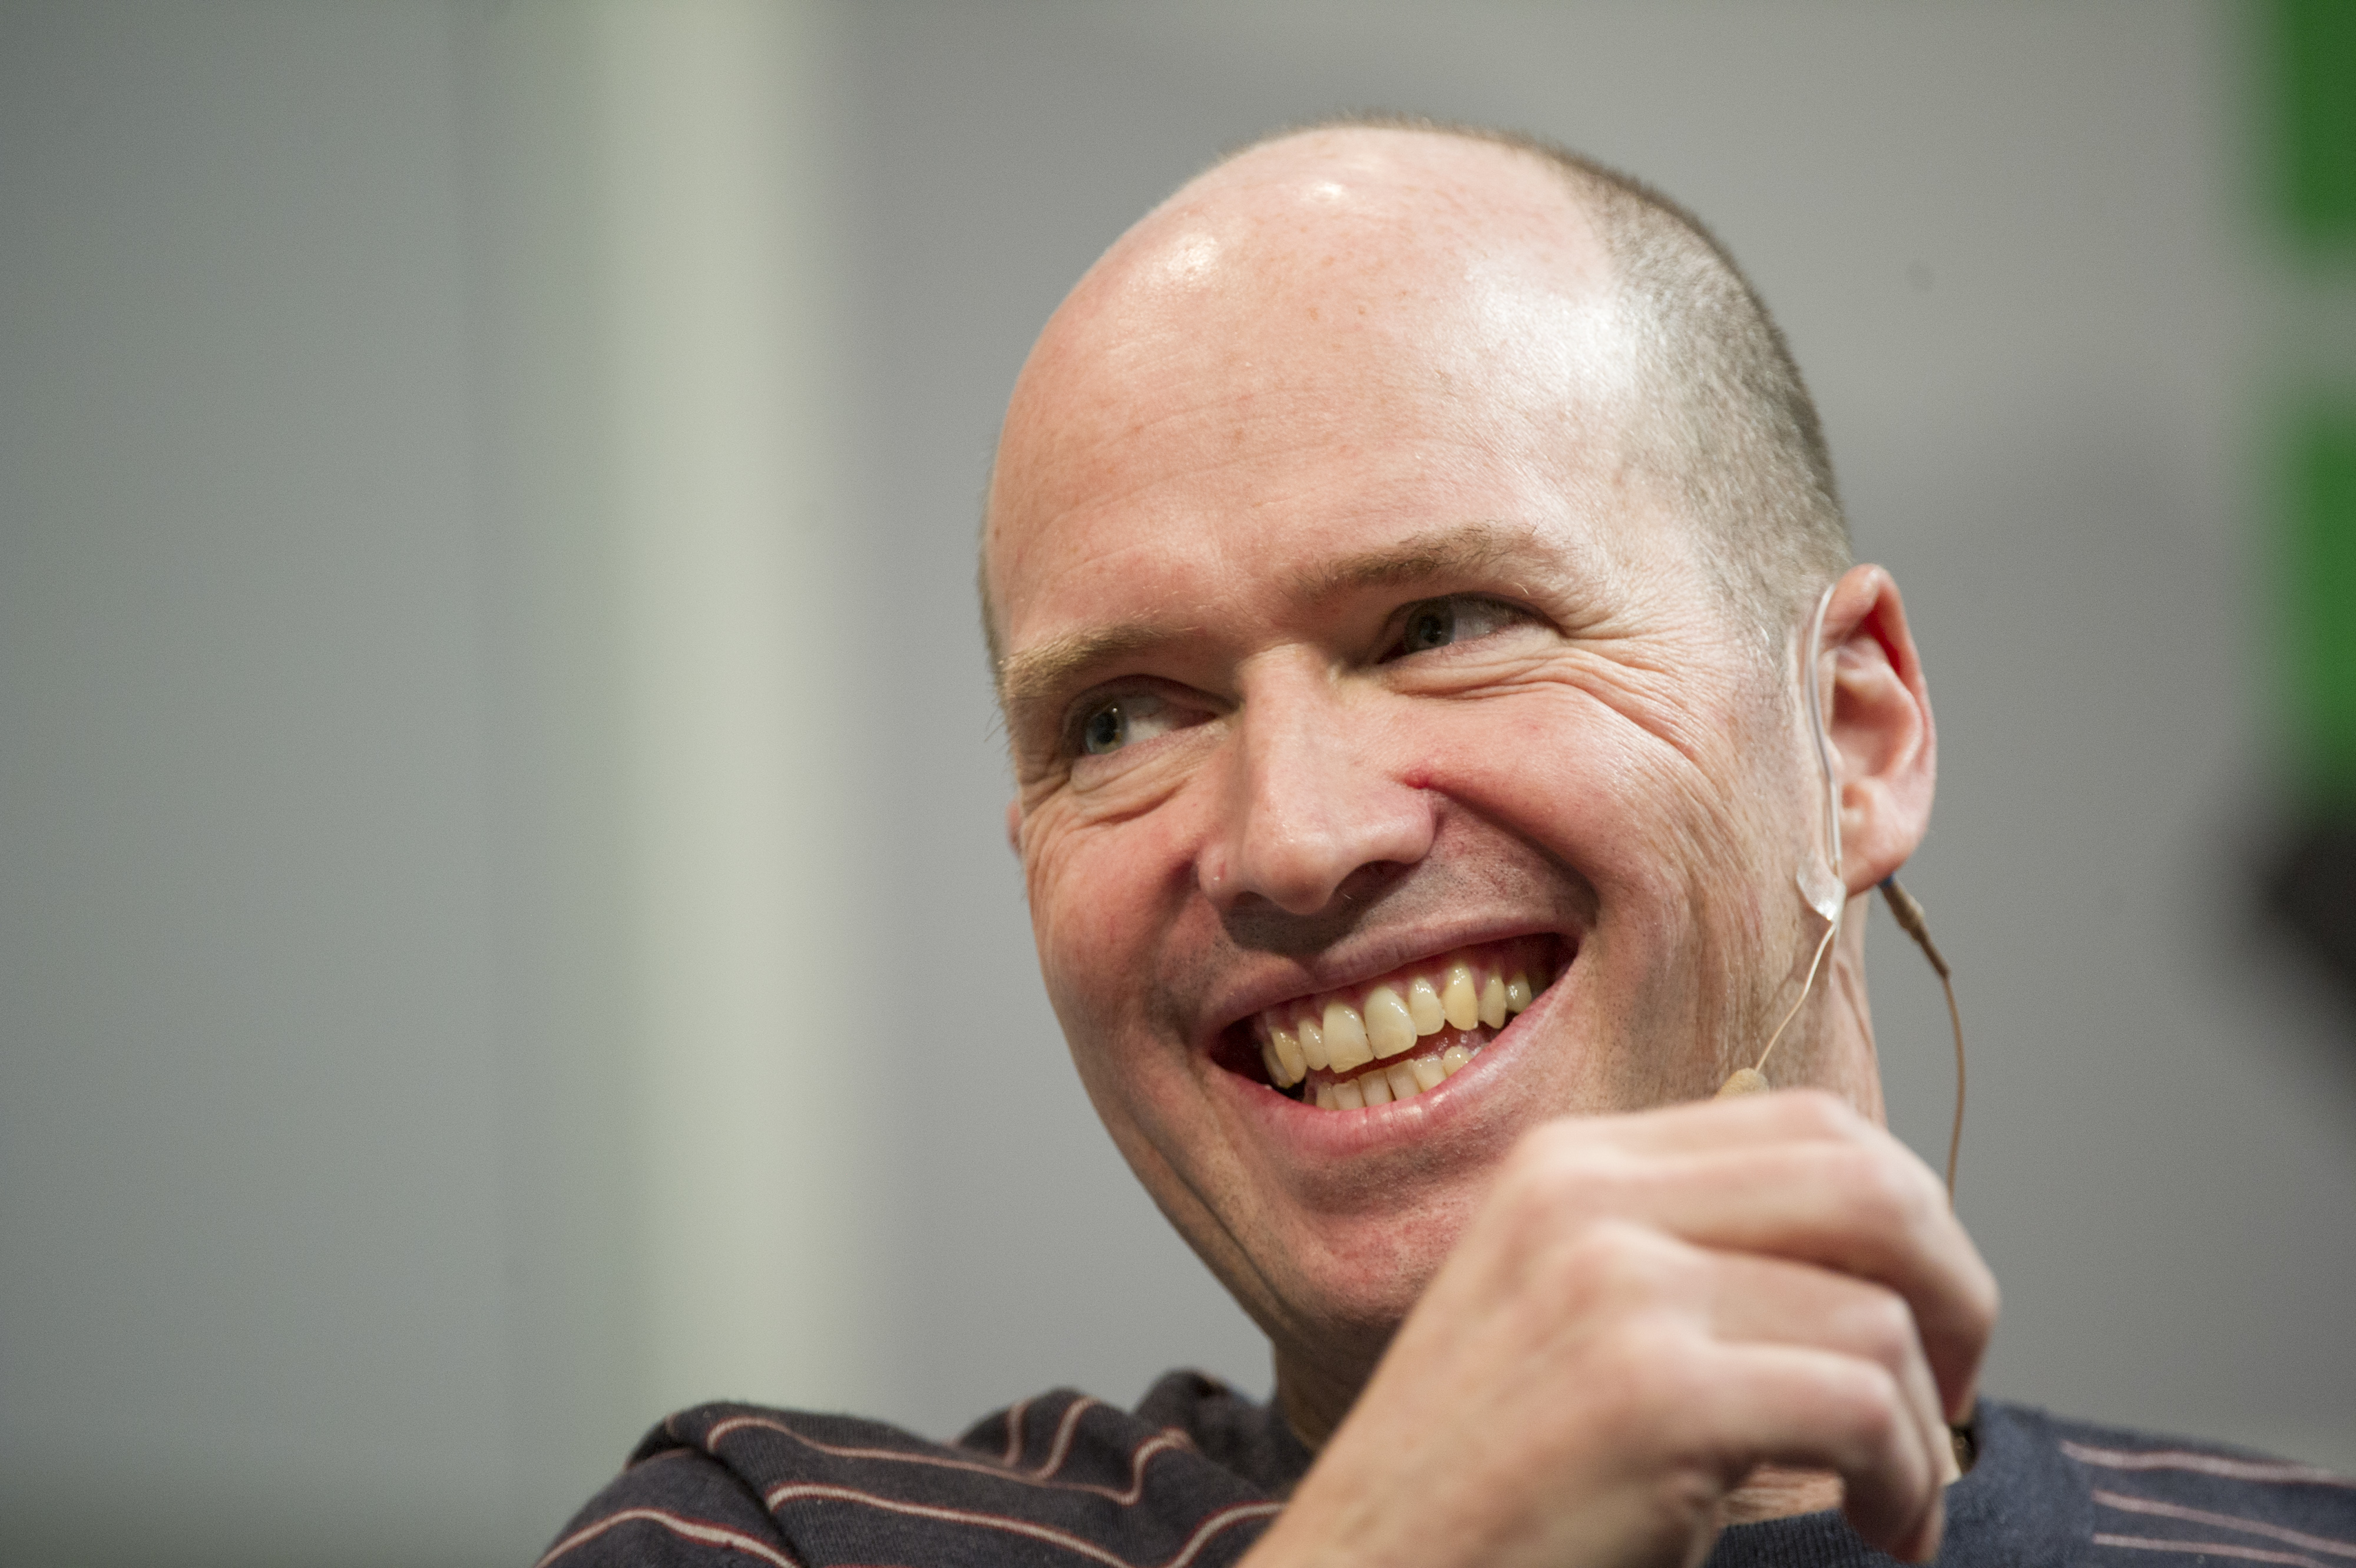 Ben Horowitz at the South By Southwest (SXSW) Interactive Festival in Austin on March 9, 2014.